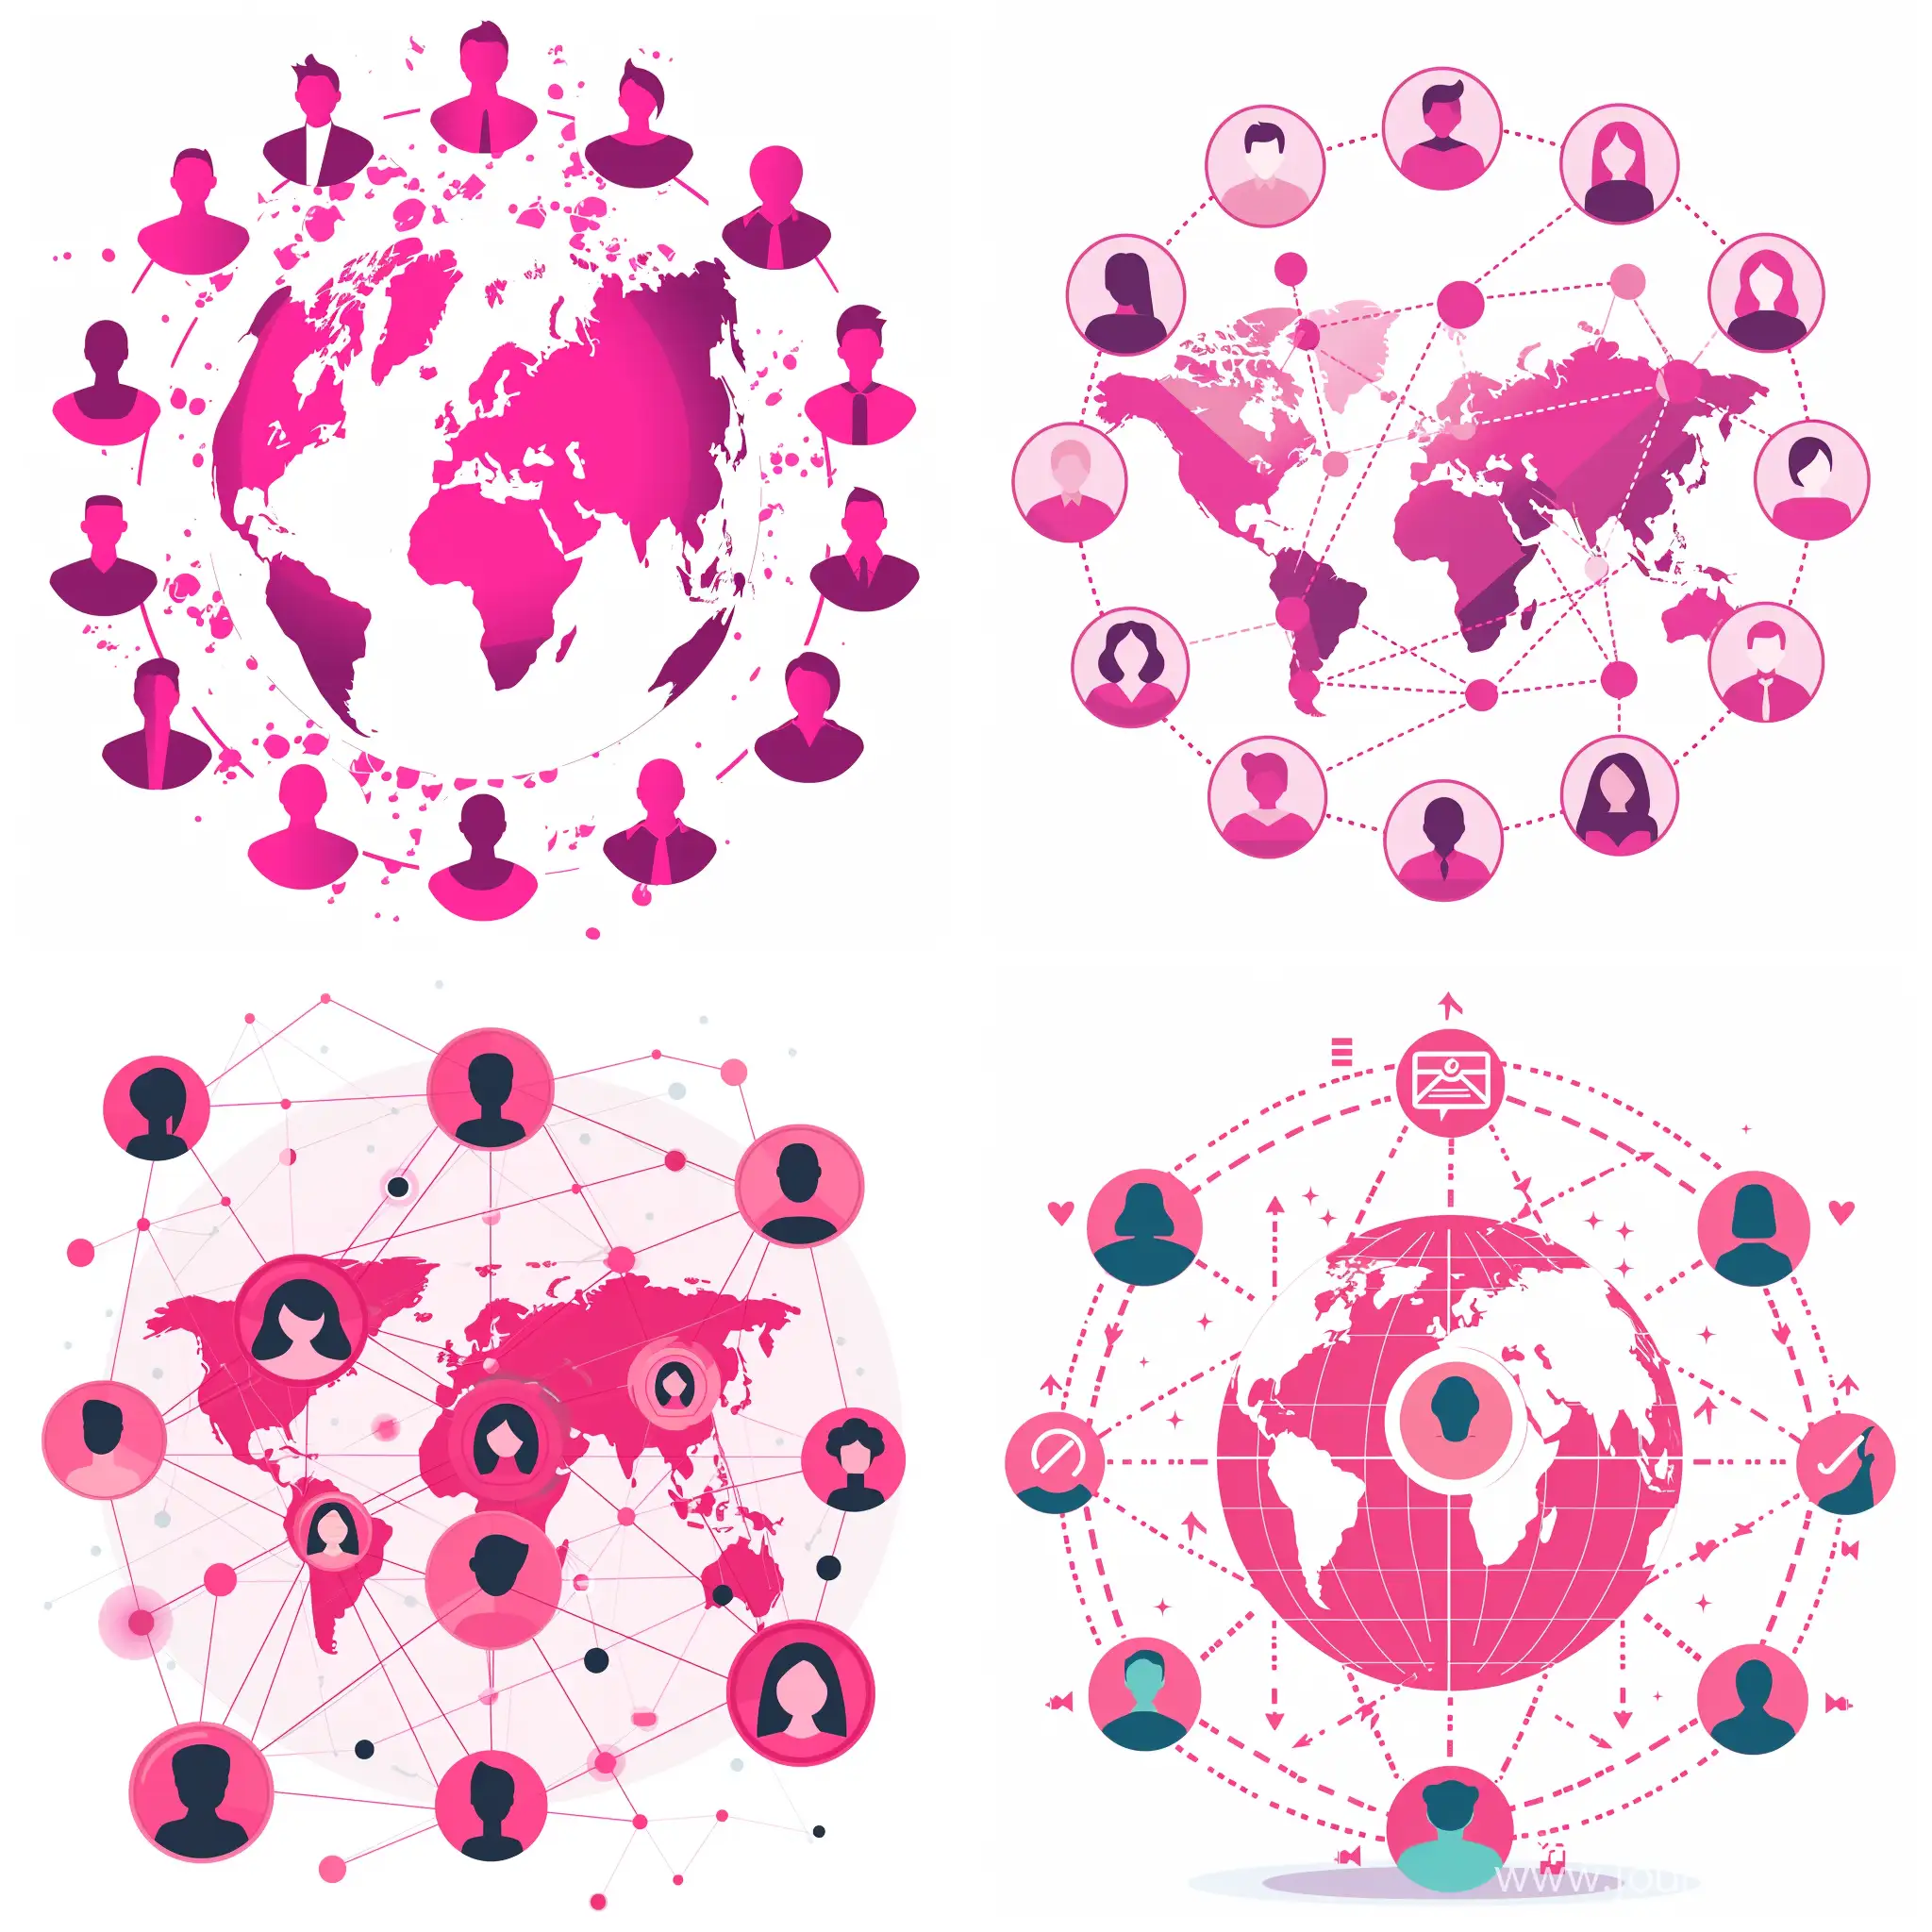 Discover-New-Connections-in-a-Vibrant-Pink-World-User-Profile-Exploration-Vector